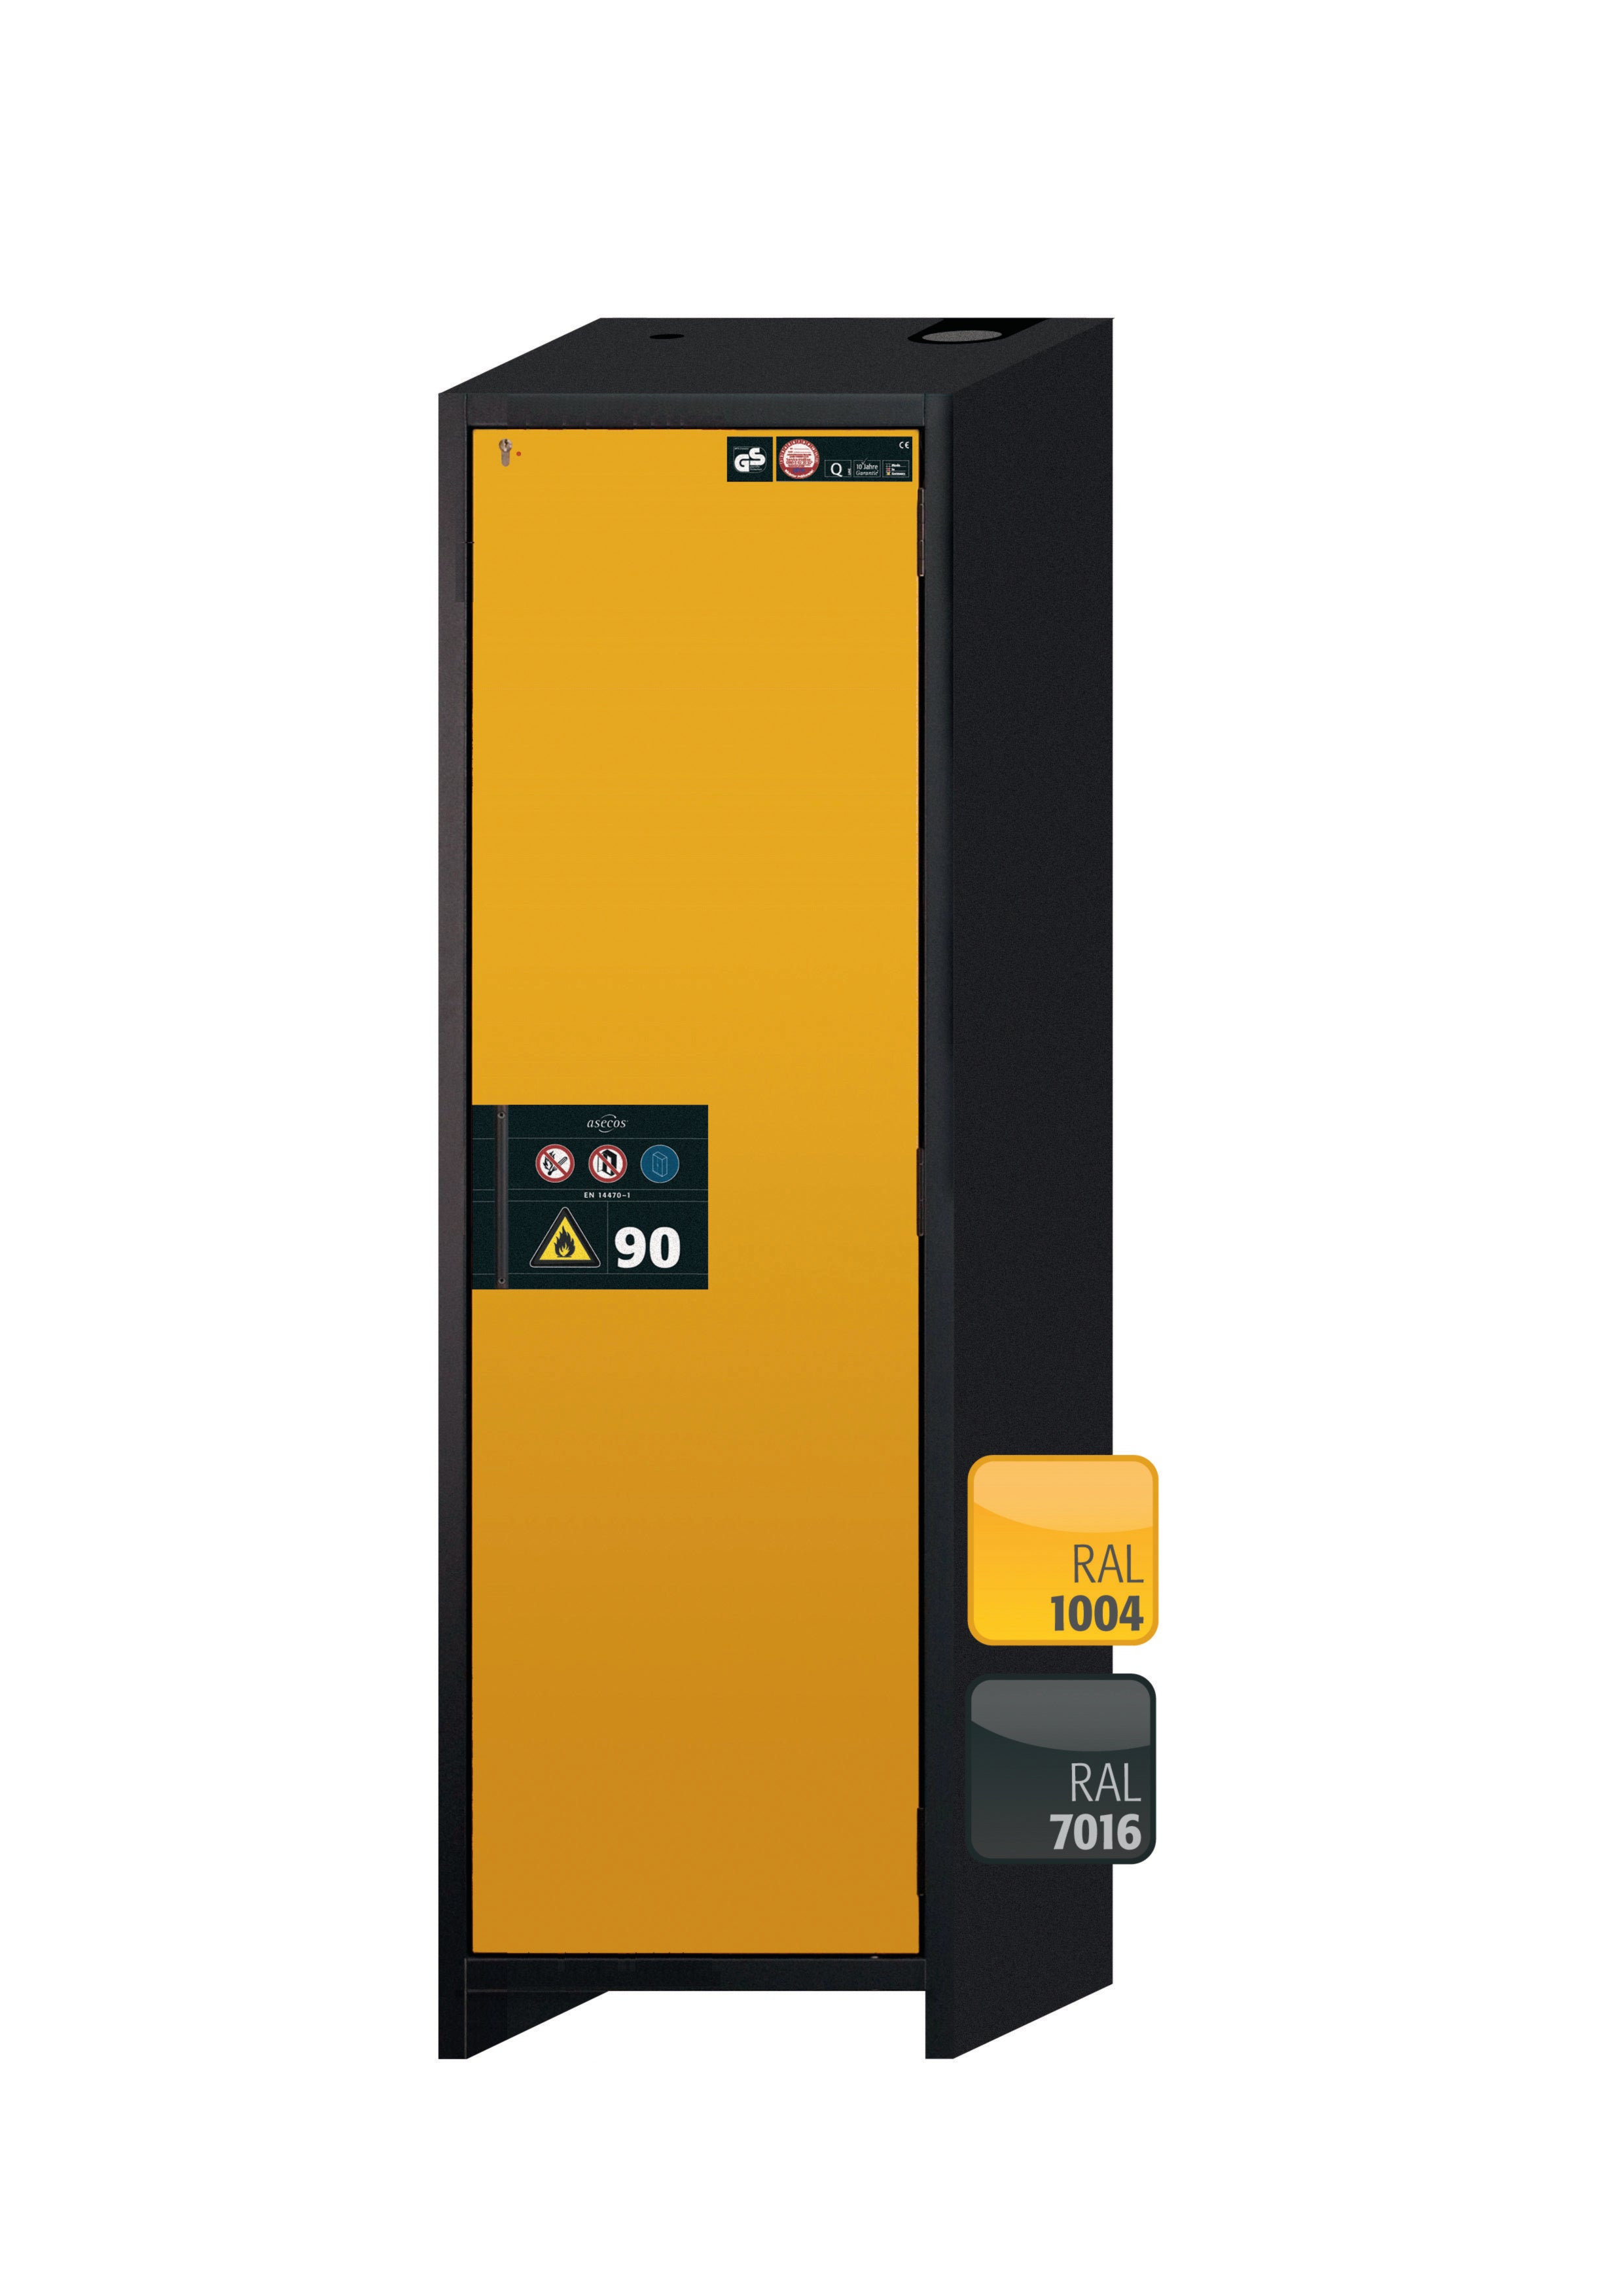 Type 90 safety storage cabinet Q-PEGASUS-90 model Q90.195.060.WDACR in warning yellow RAL 1004 with 2x shelf standard (stainless steel 1.4301),